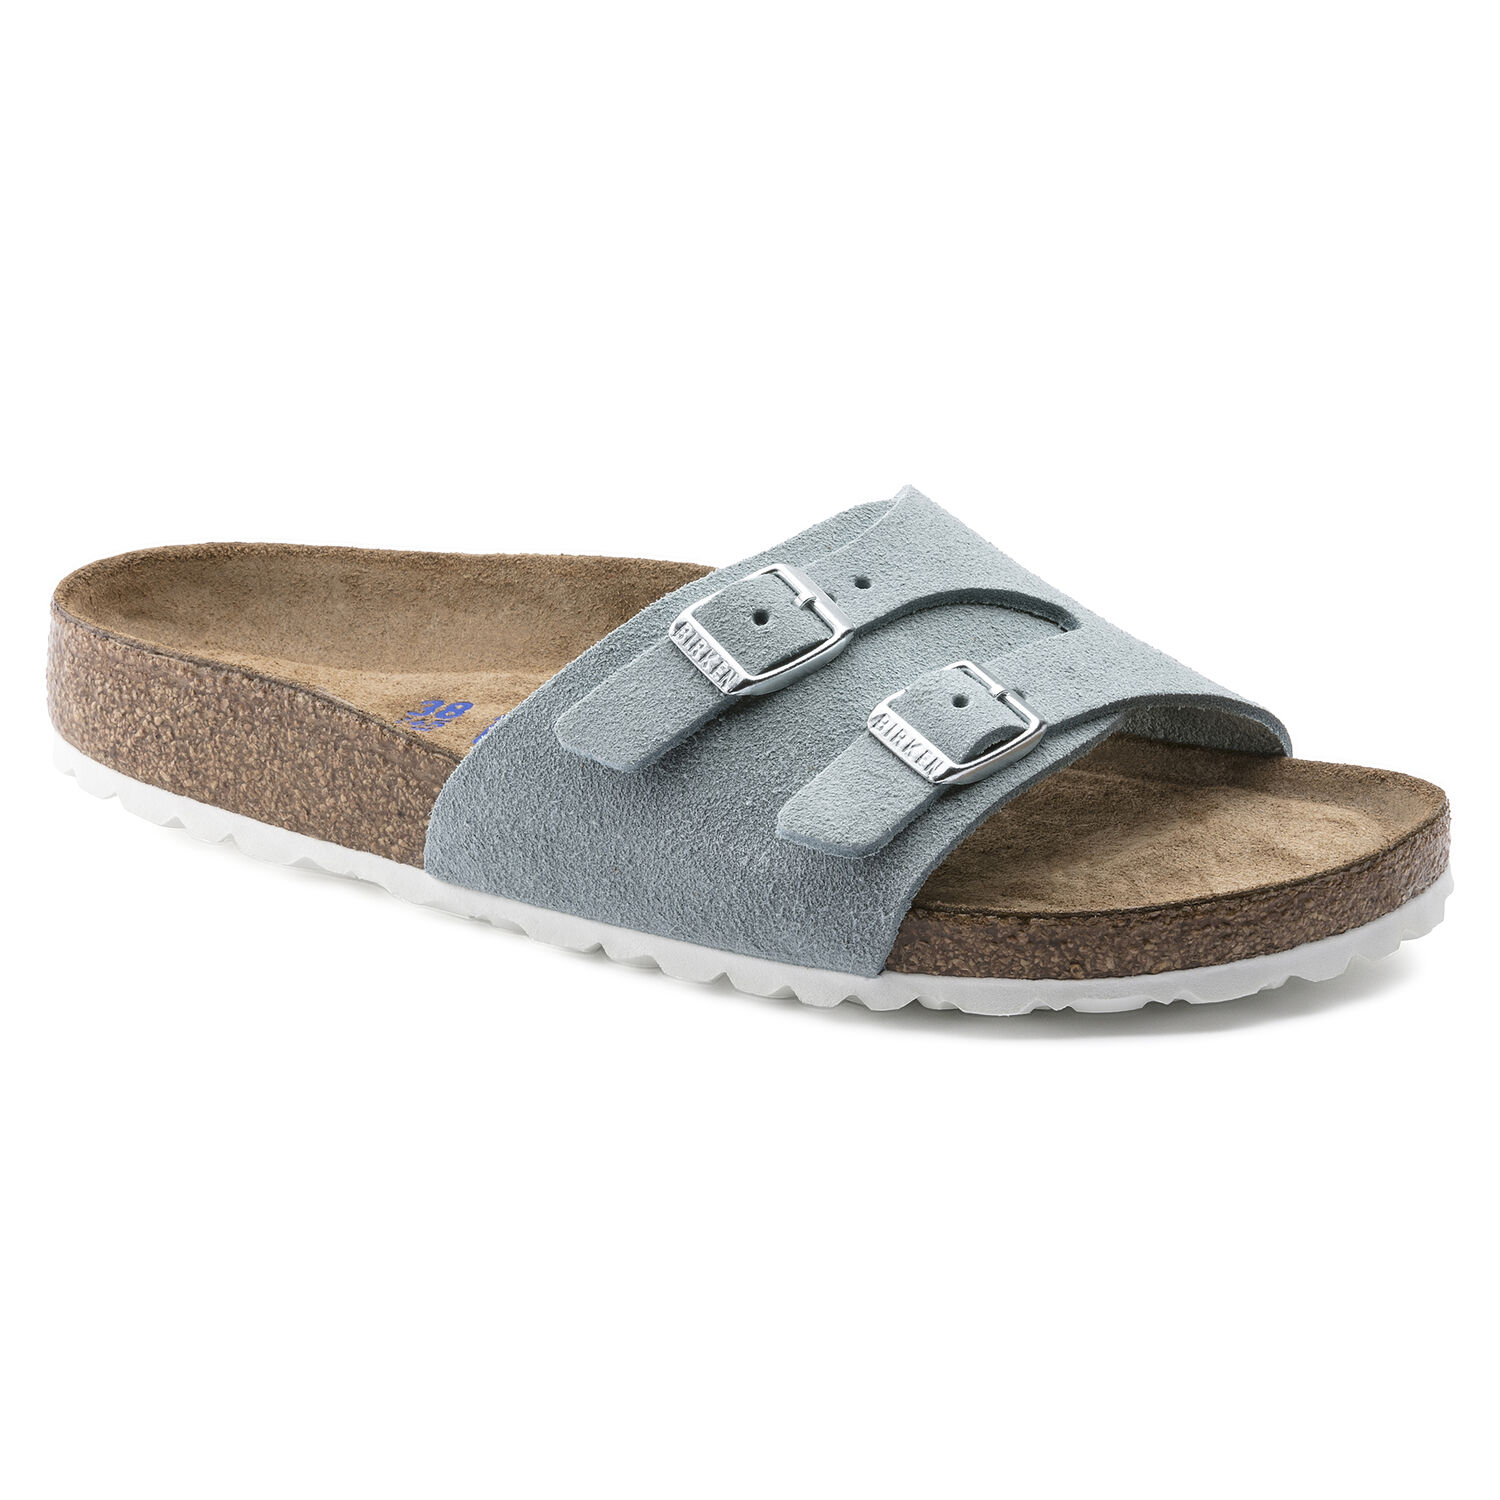 Topper Sports Malaysia - BIRKENSTOCK VADUZ SOFT FOOTBED SUEDE LEATHER ...